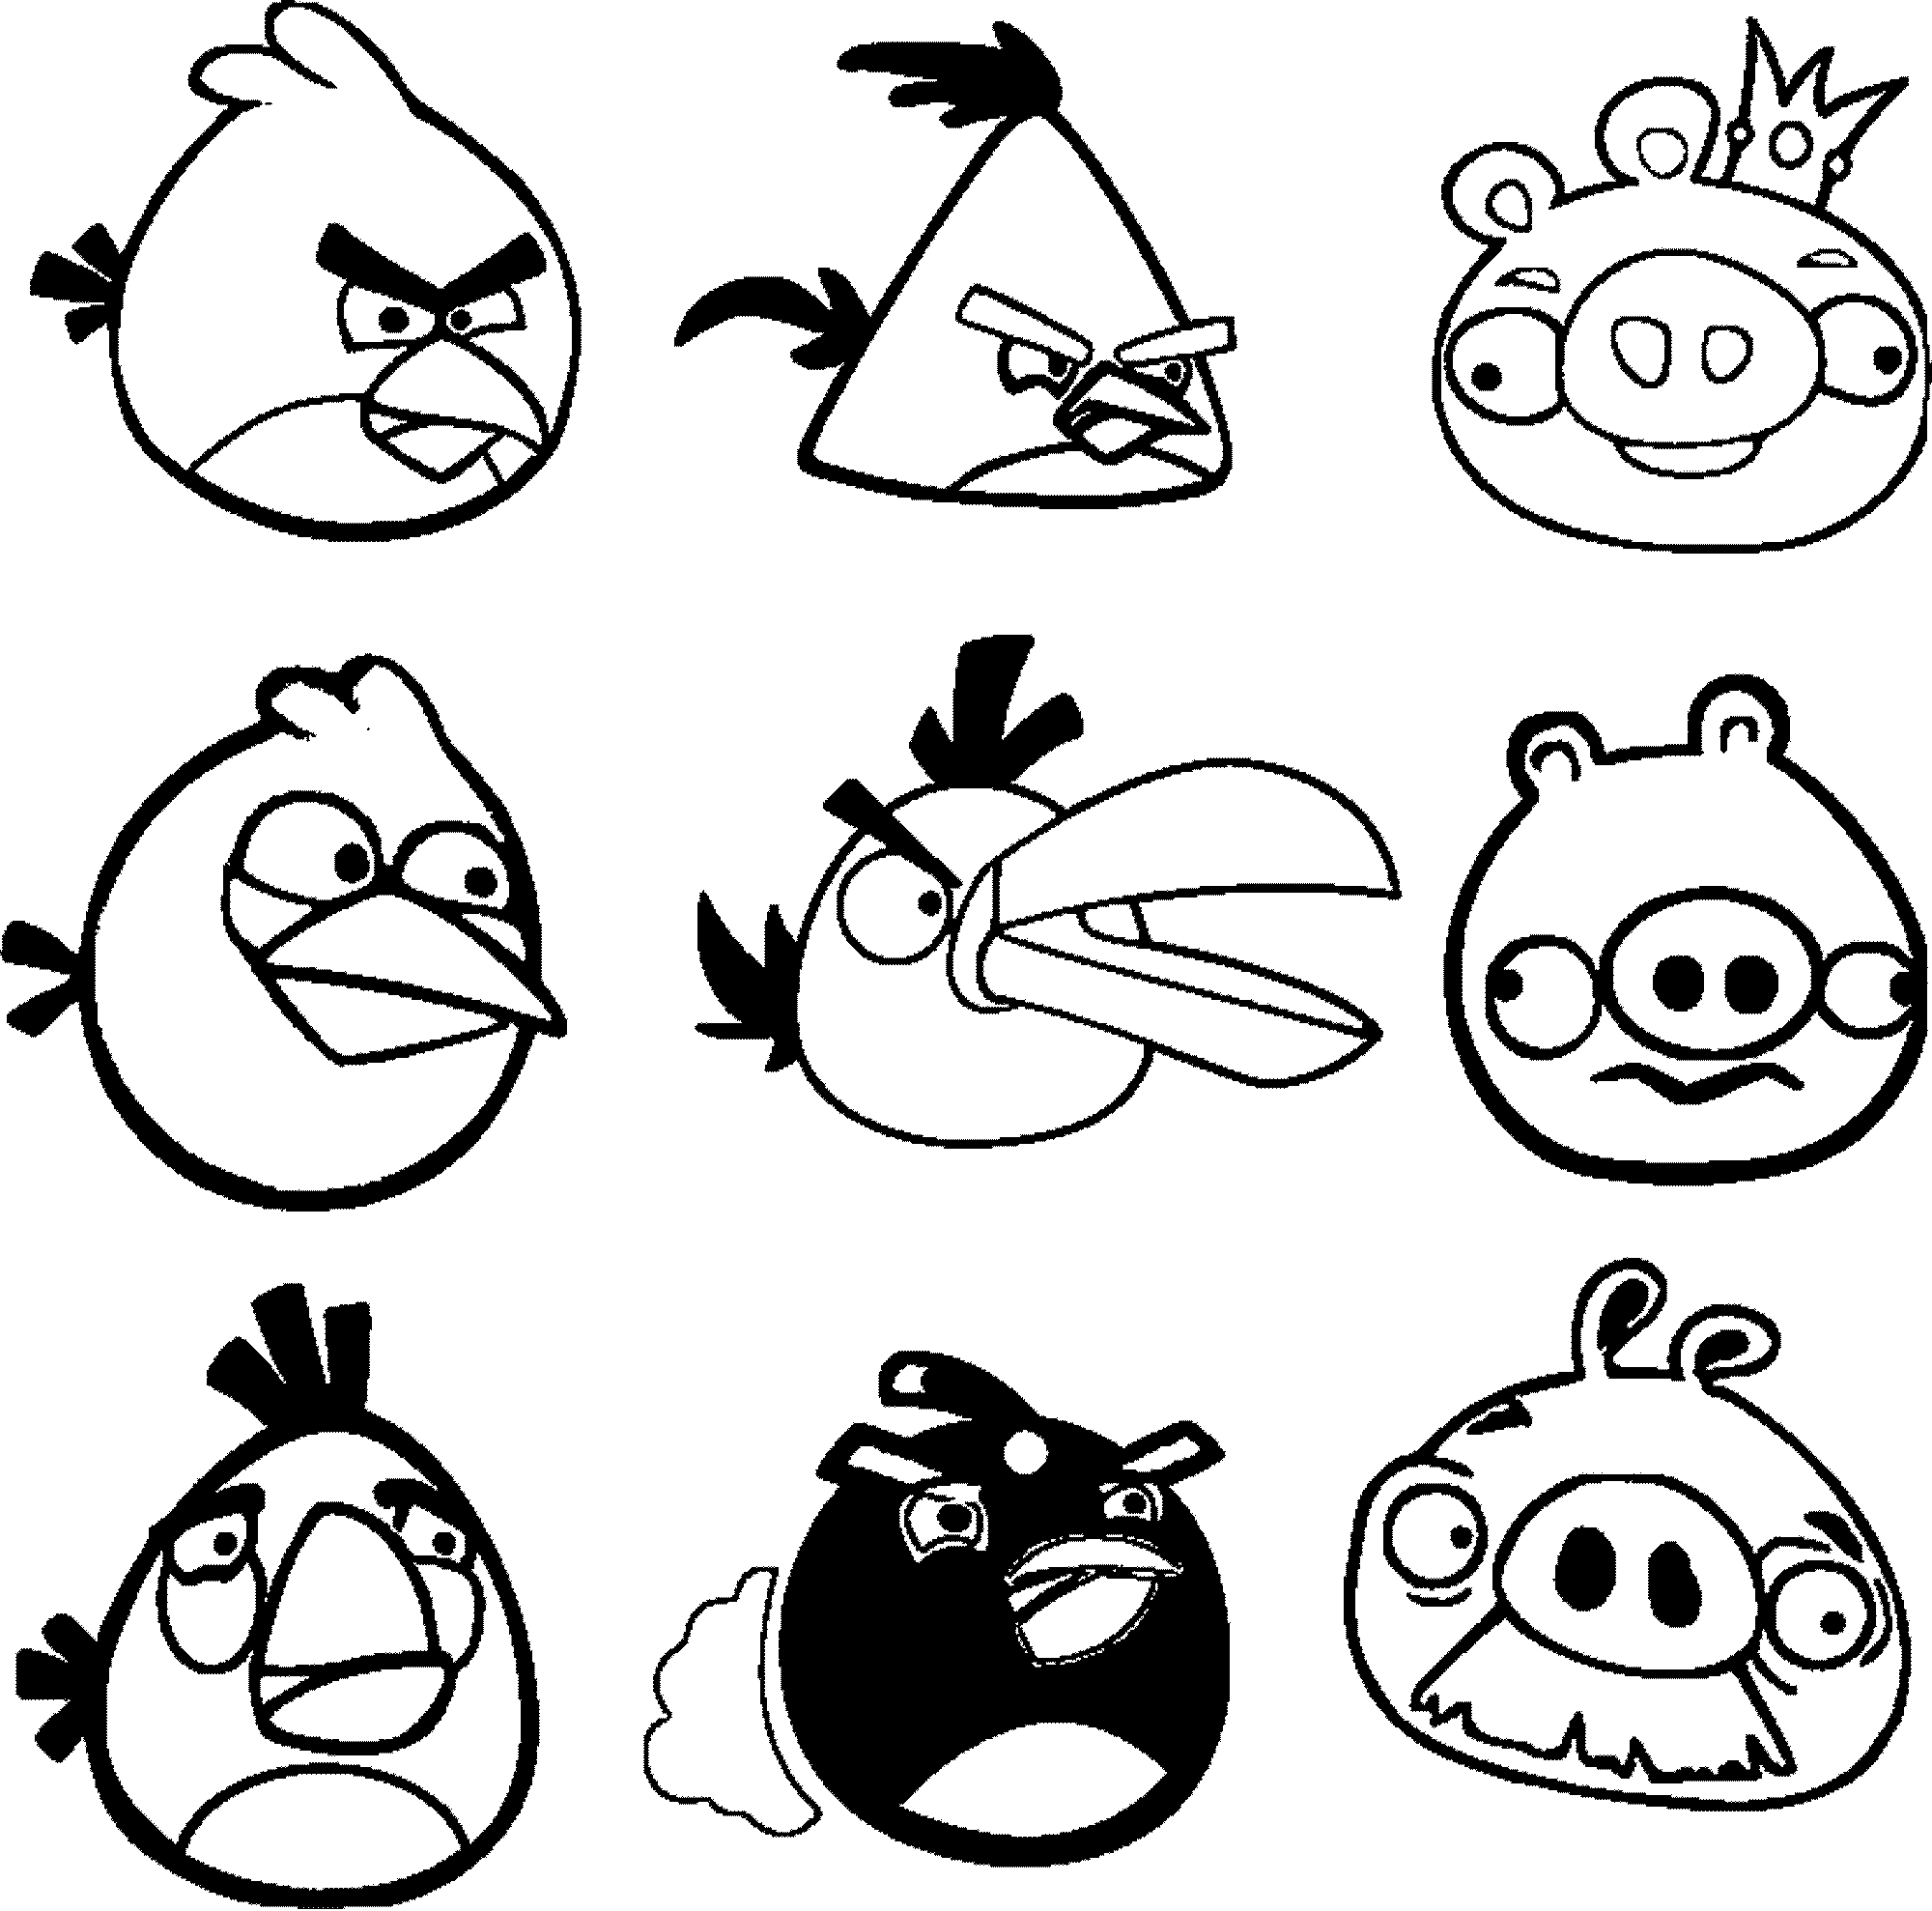 Angry Birds Coloring Pages for Your Small Kids